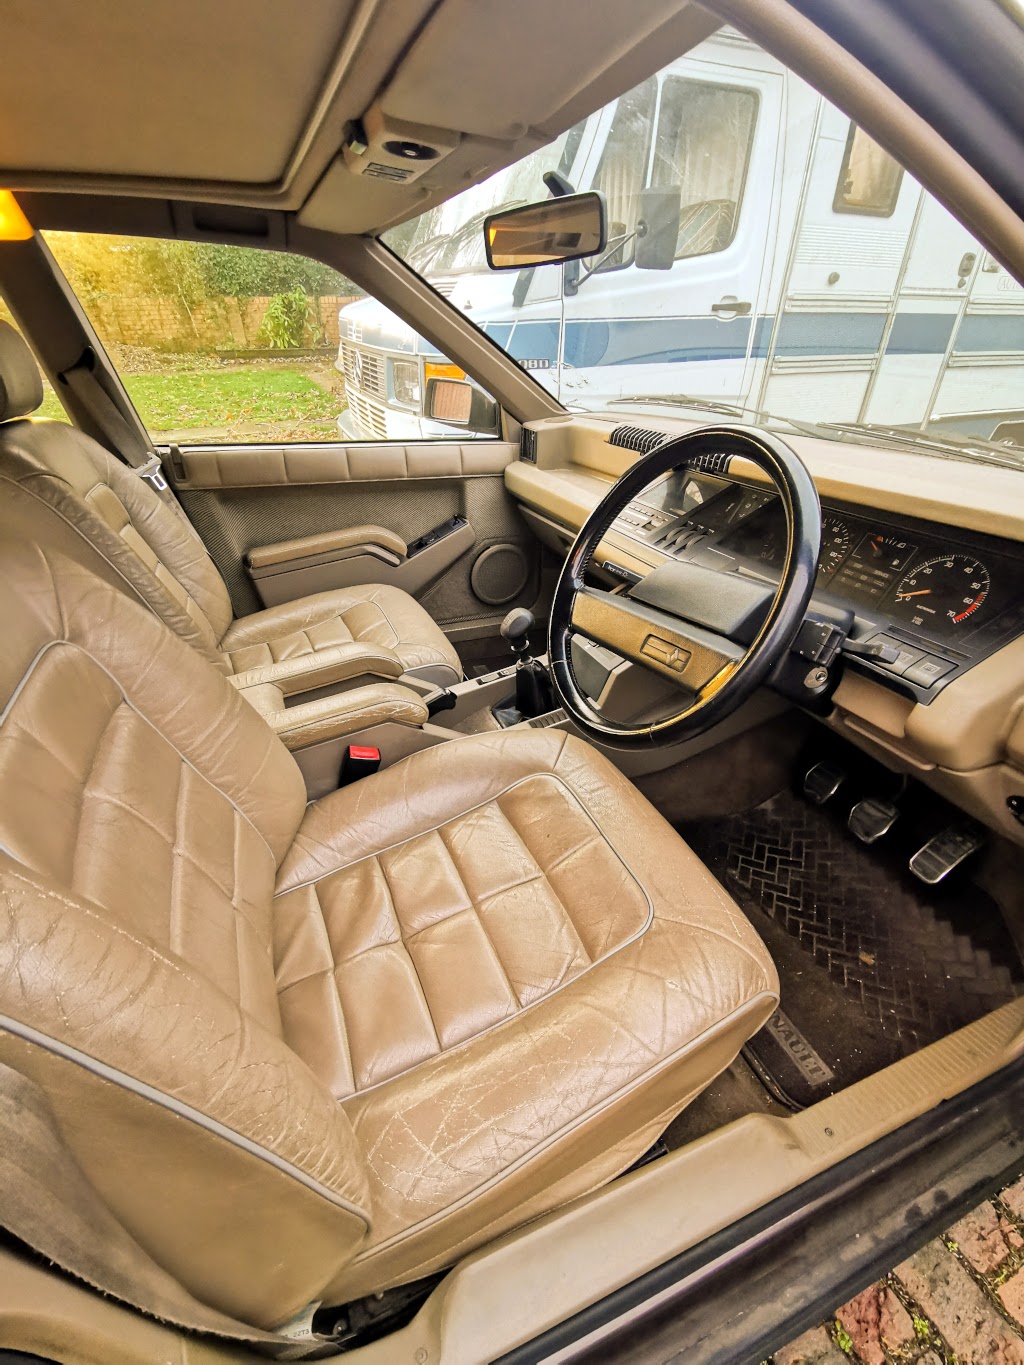 Interior of my Renault 25 Monaco as it looked when it arrived home